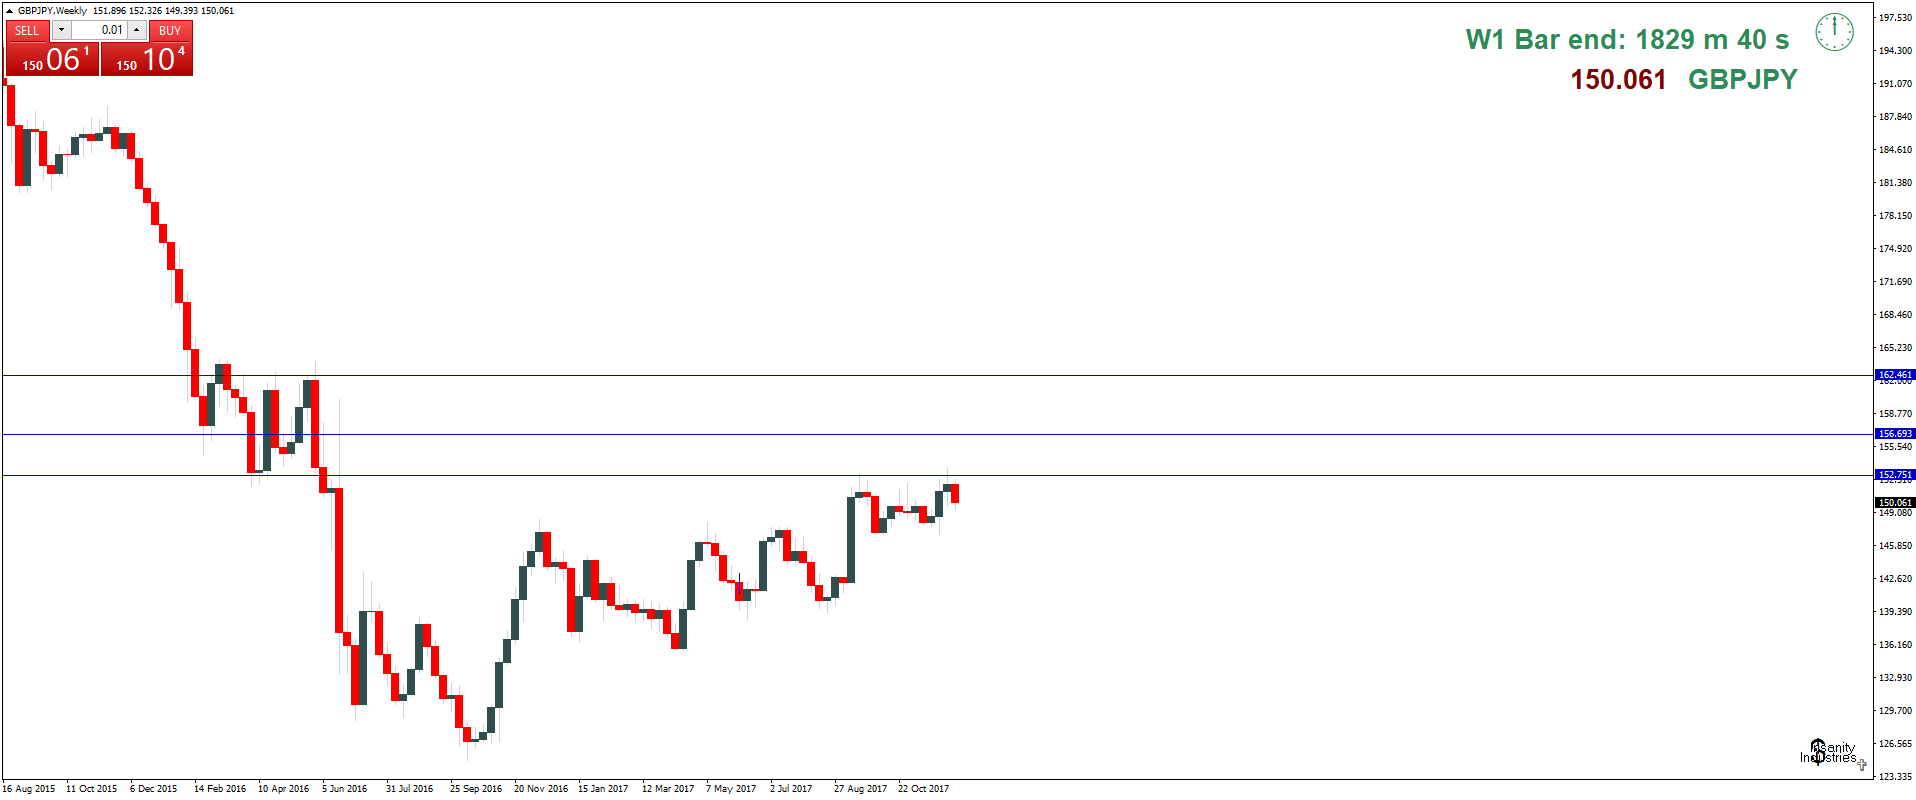 gbpjpy-w1-capital-city-markets.png